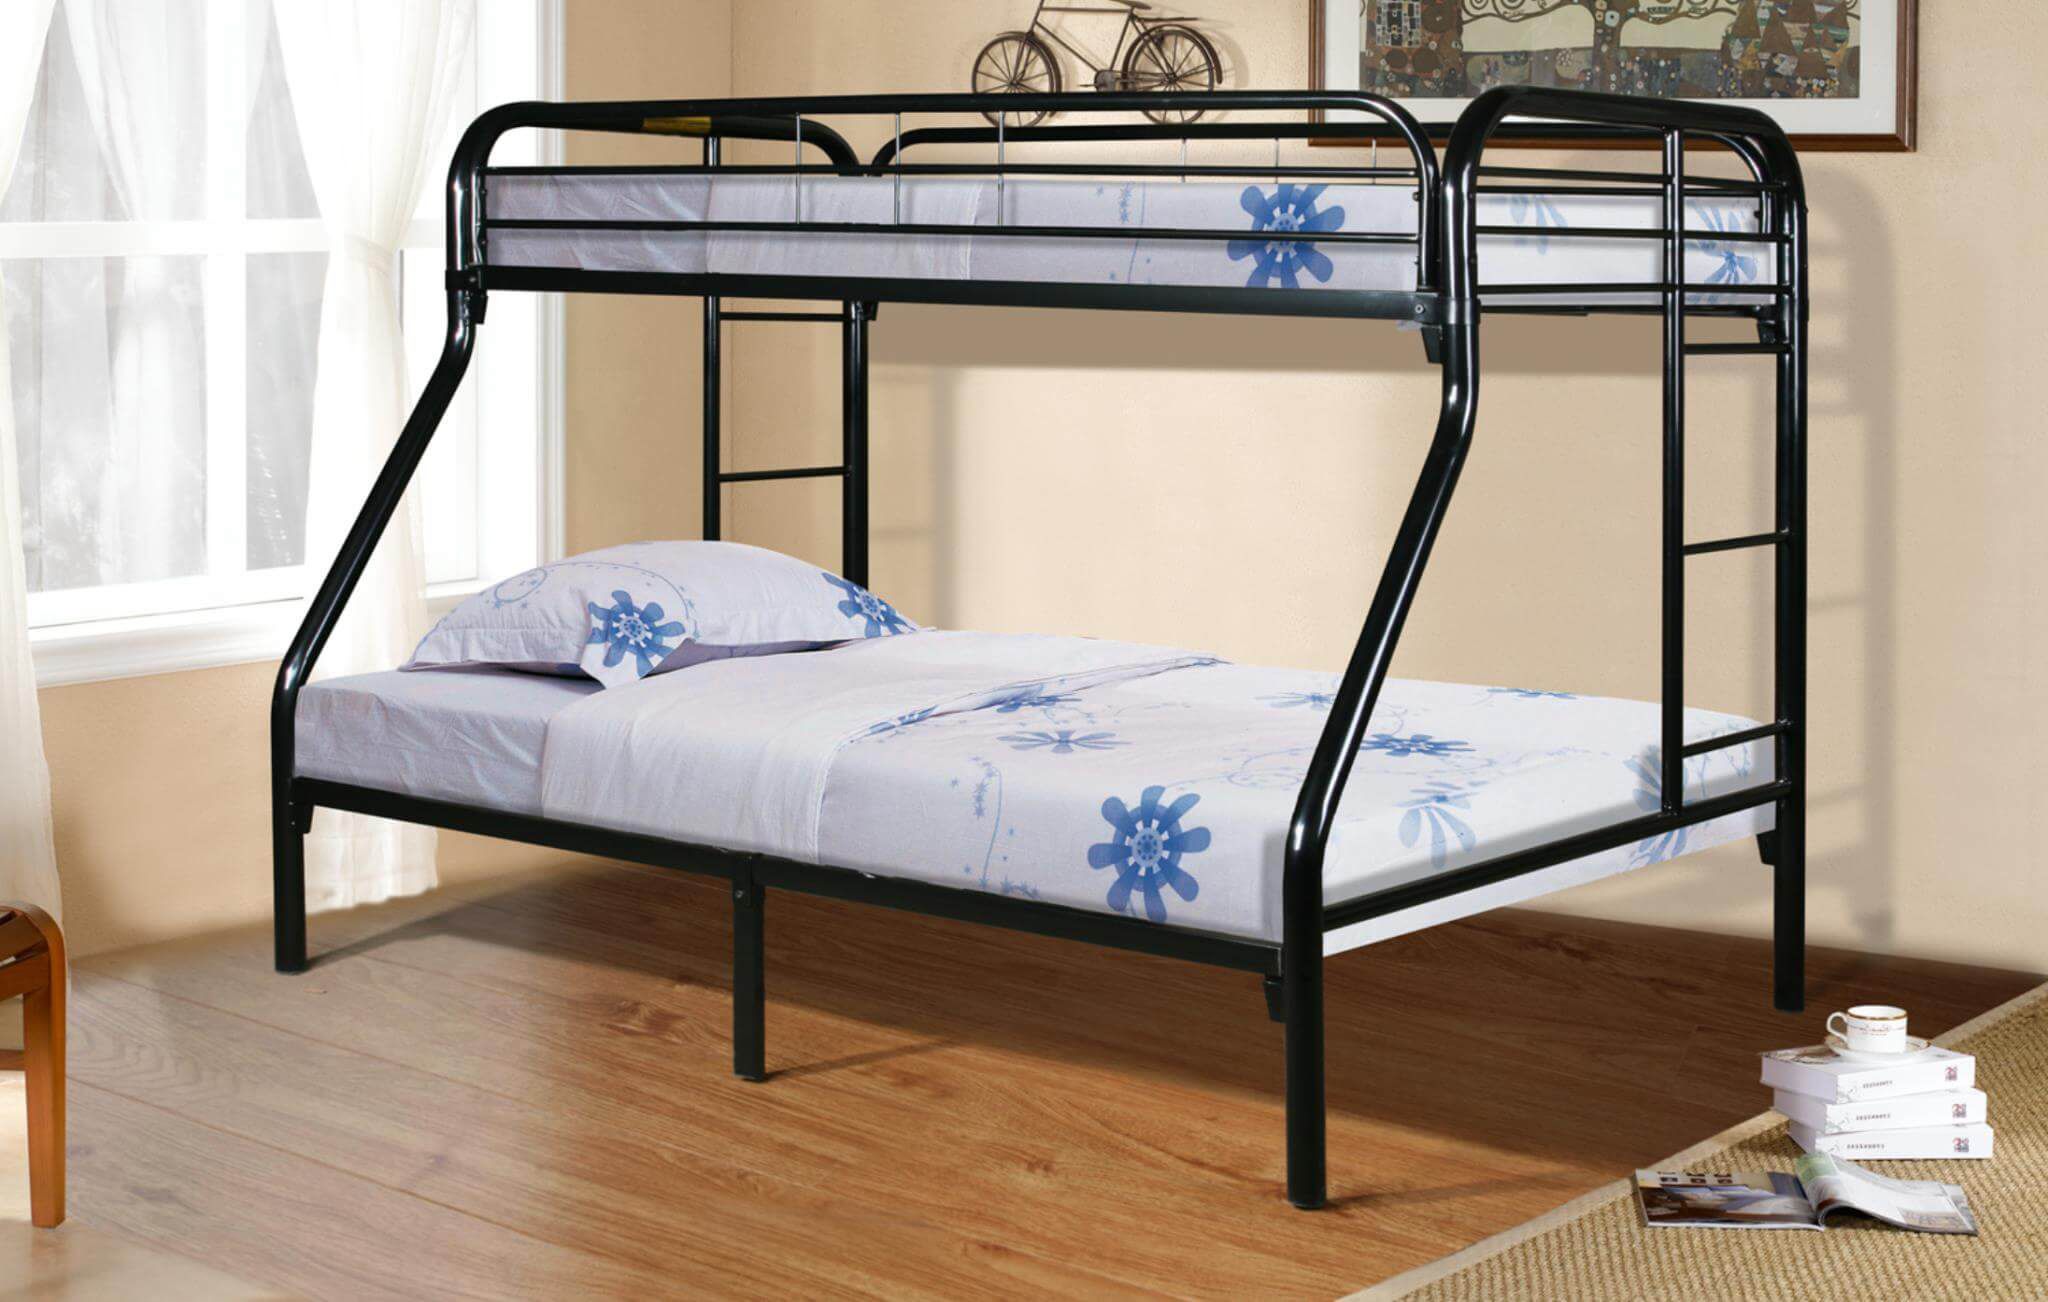 Double Bunk Beds *Frame Only*